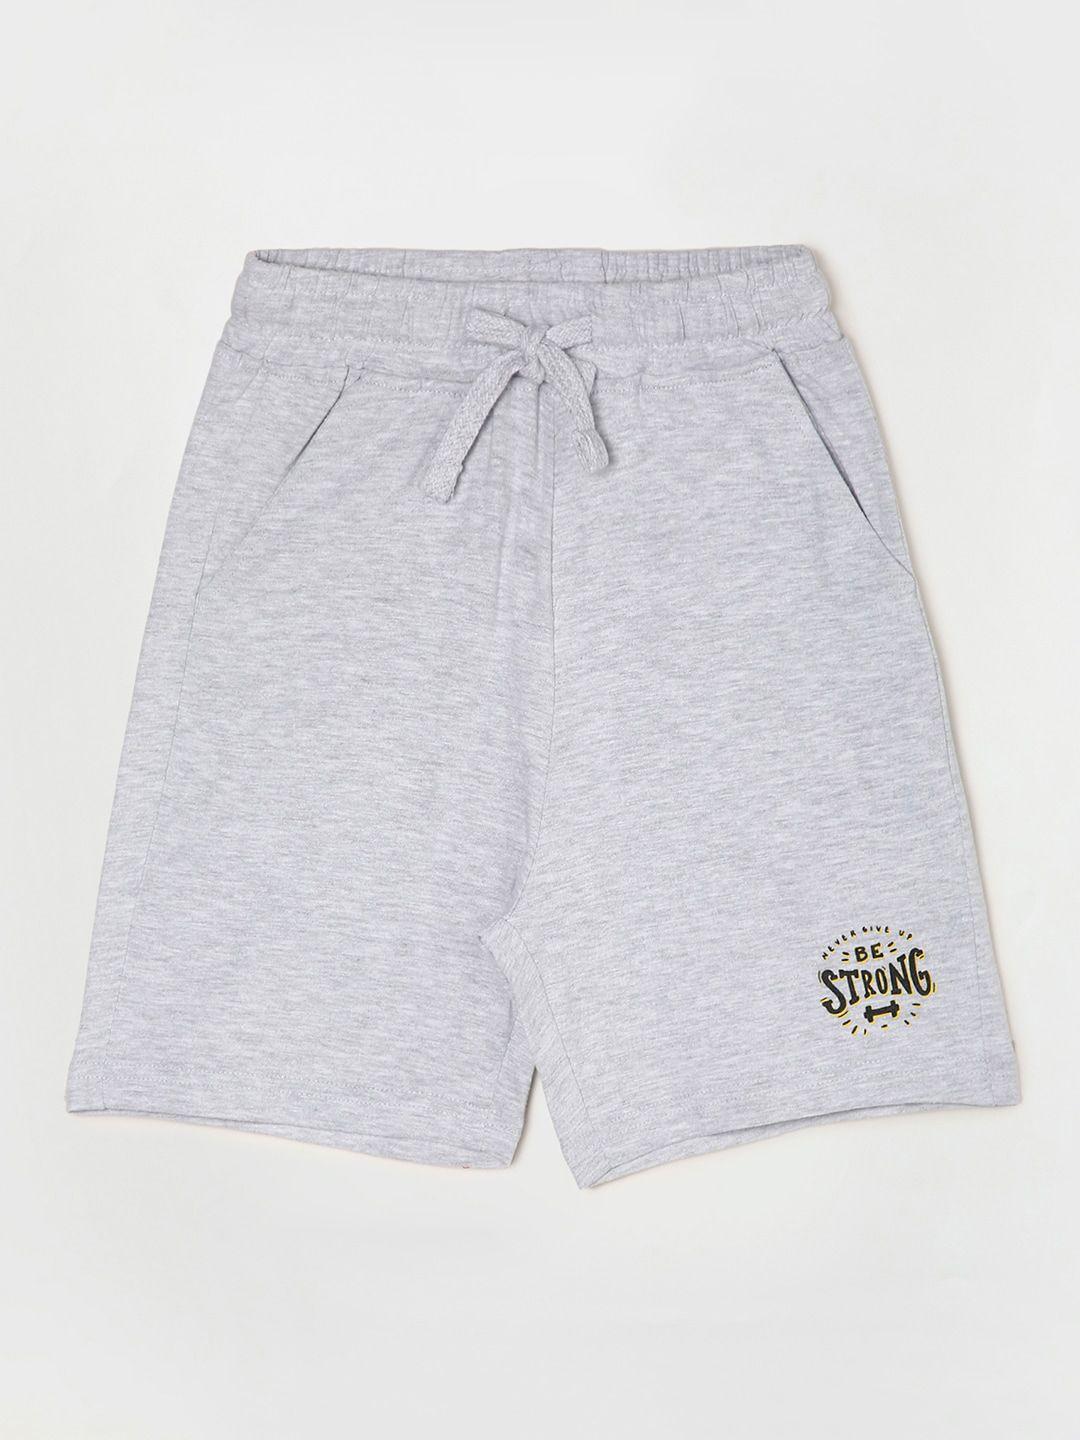 fame-forever-by-lifestyle-boys-grey-shorts